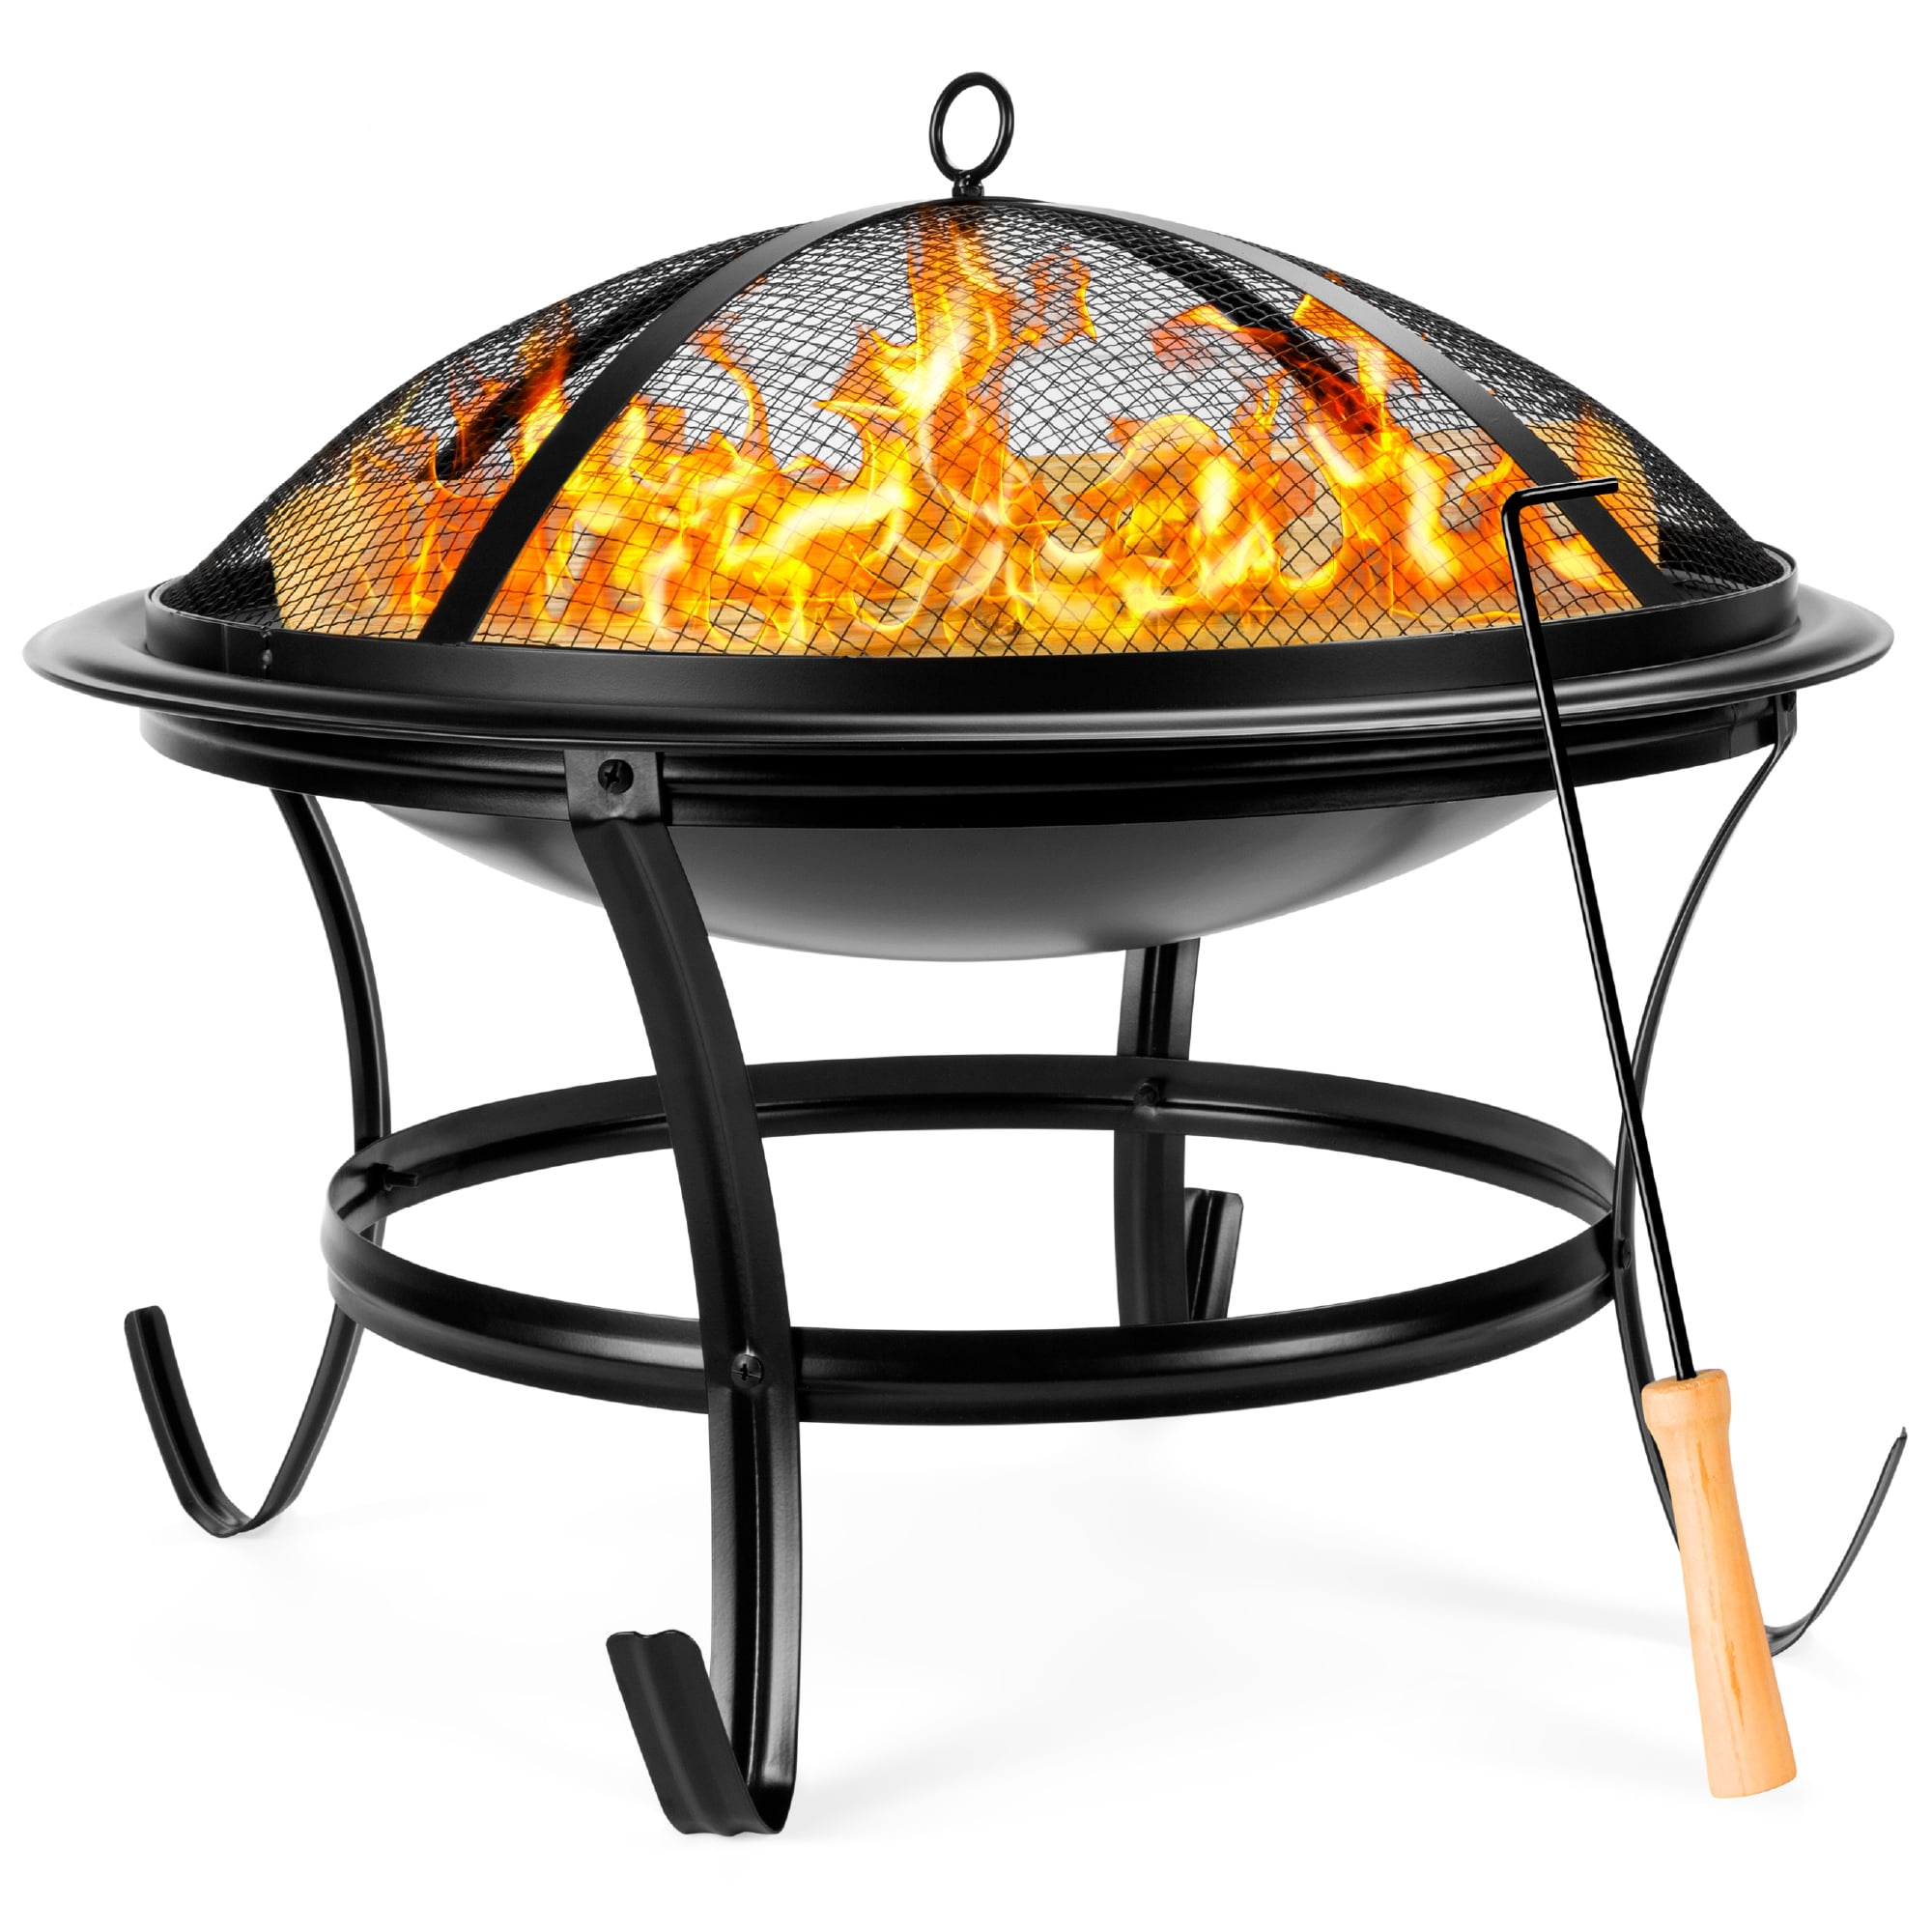 Best Choice S 22in Steel Outdoor Bbq Grill Fire Pit Bowl For Camping Bonfire With Screen Cover Log Grate Black, Do I Need A Fire Pit Screen